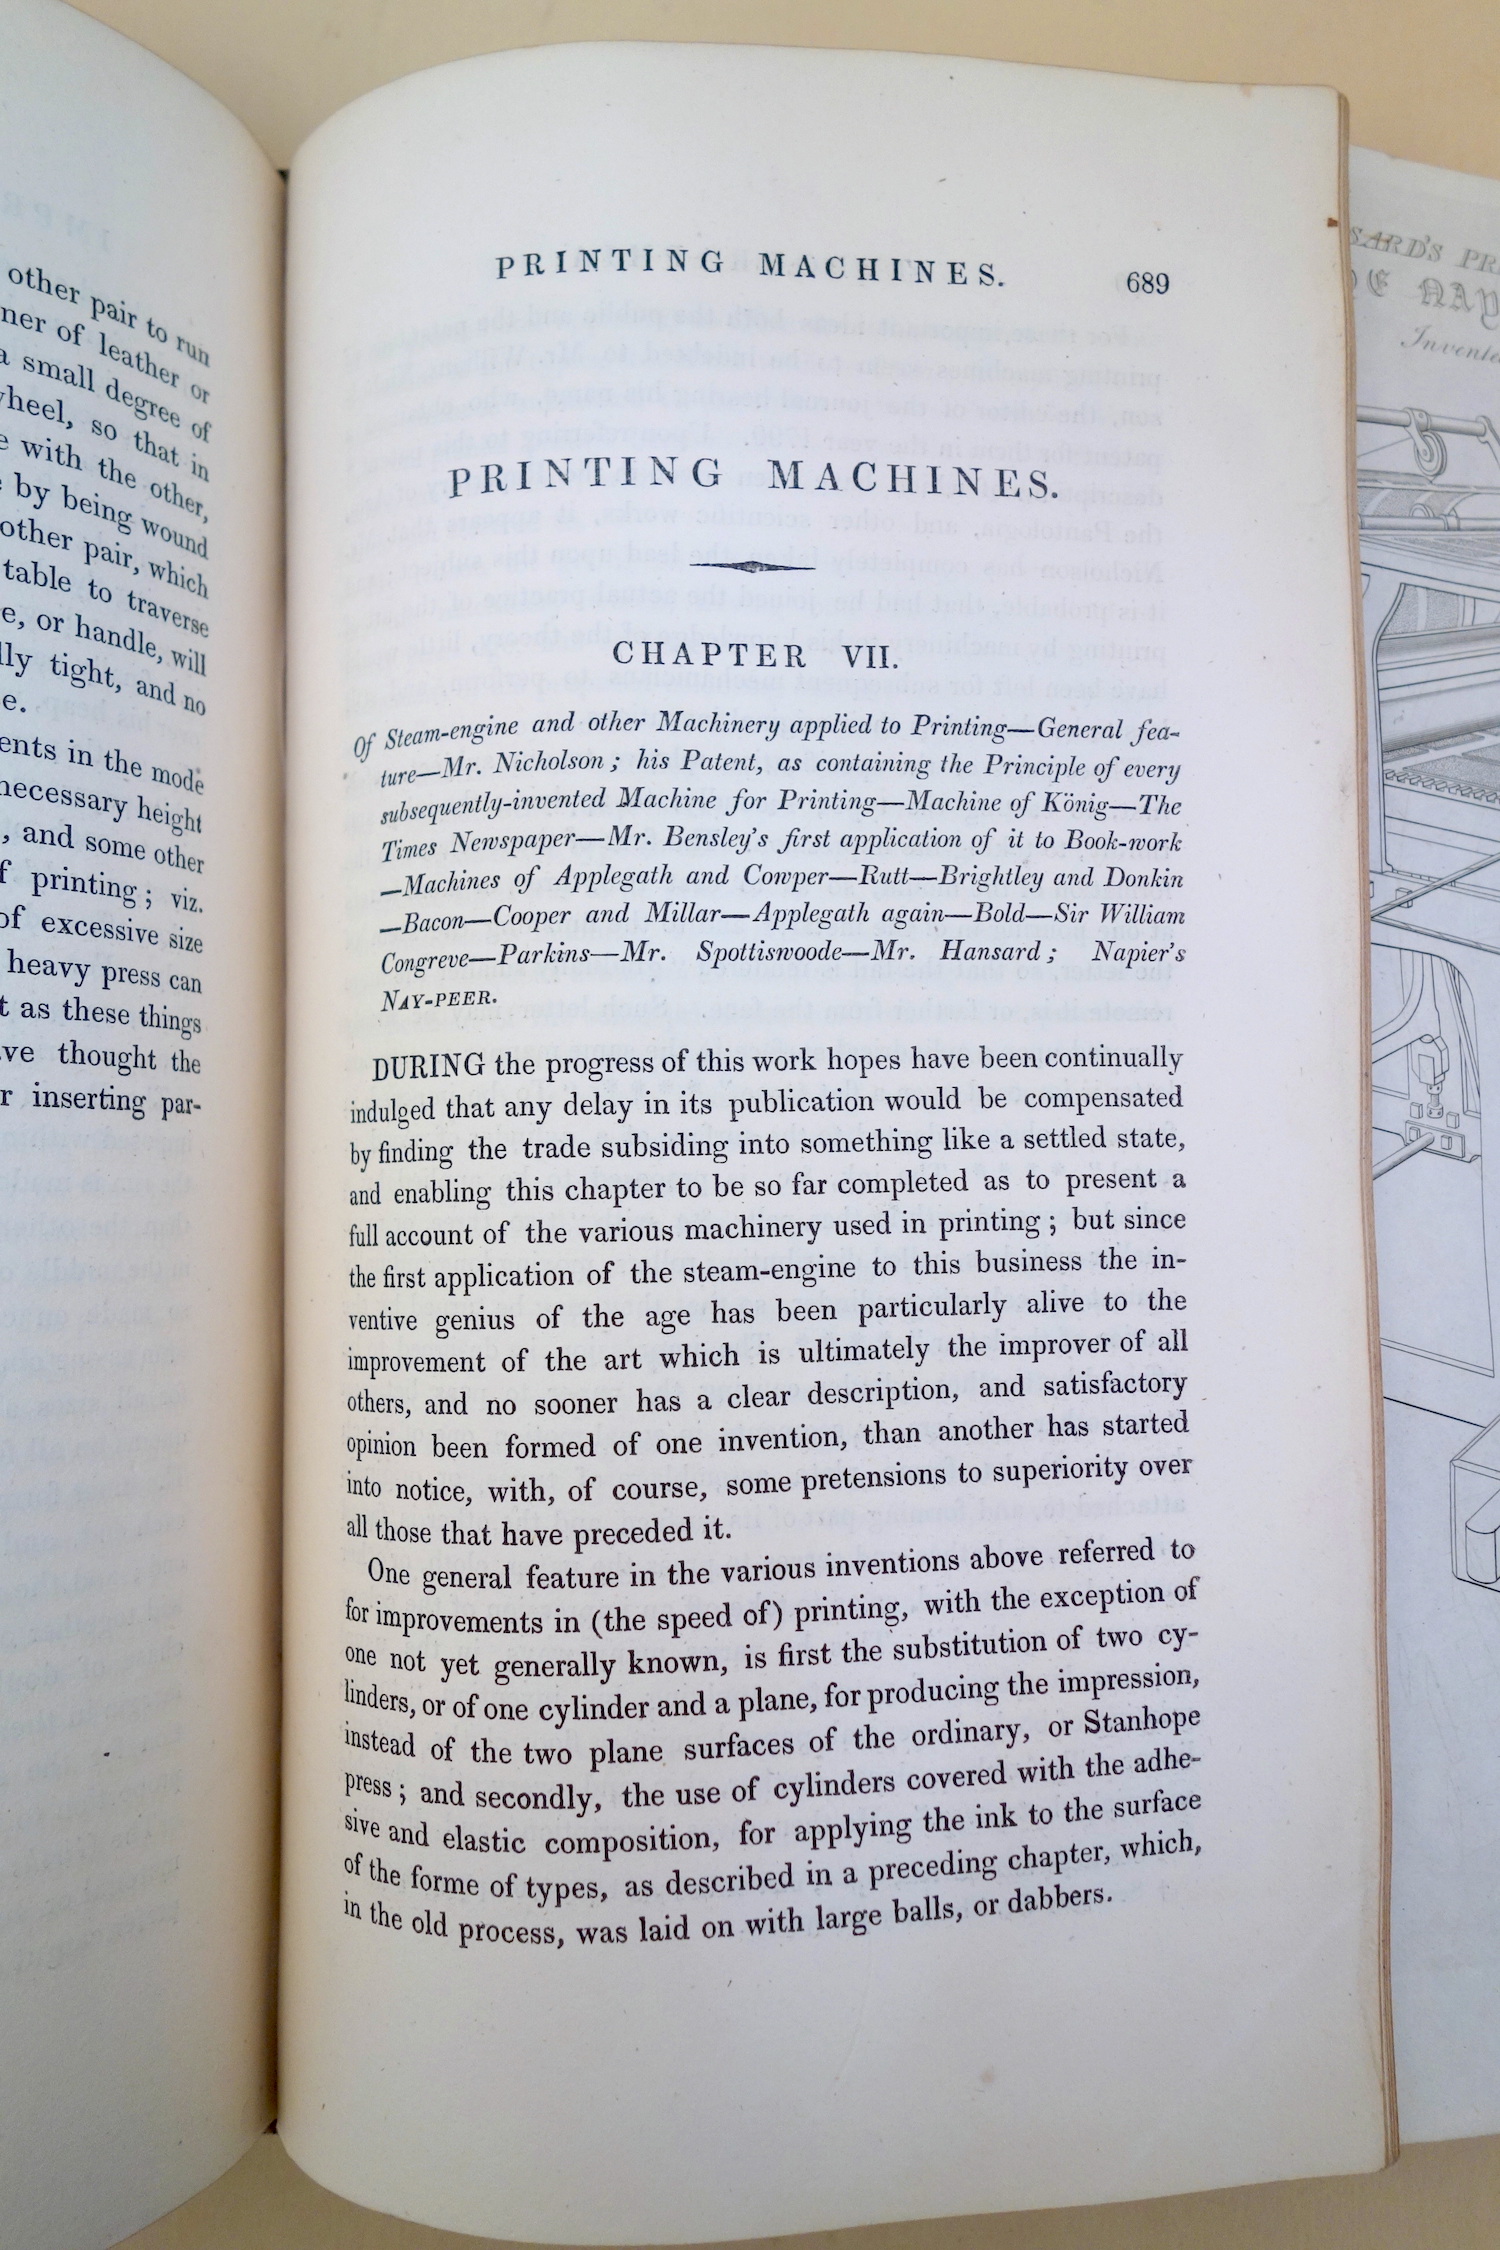 First page of Hansard's chapter on printing machines